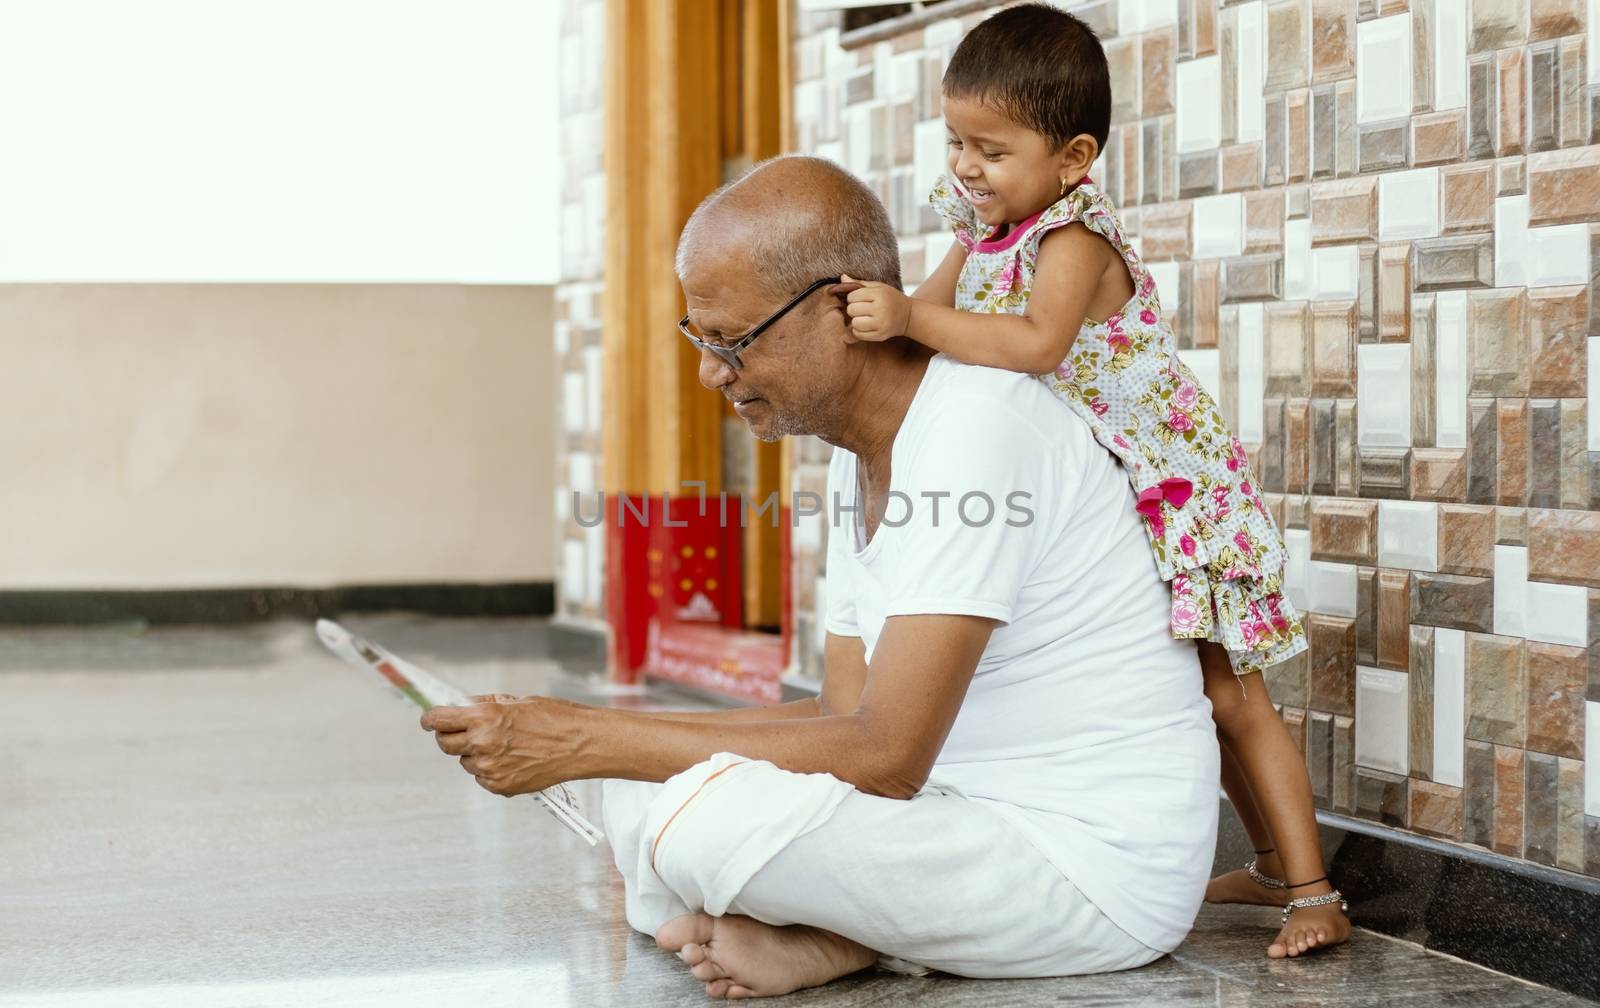 Little Granddaughter playing with grandfather by pulling grandpa's ears at home - concept of togetherness, fun, happiness and kids relationship with grandparents